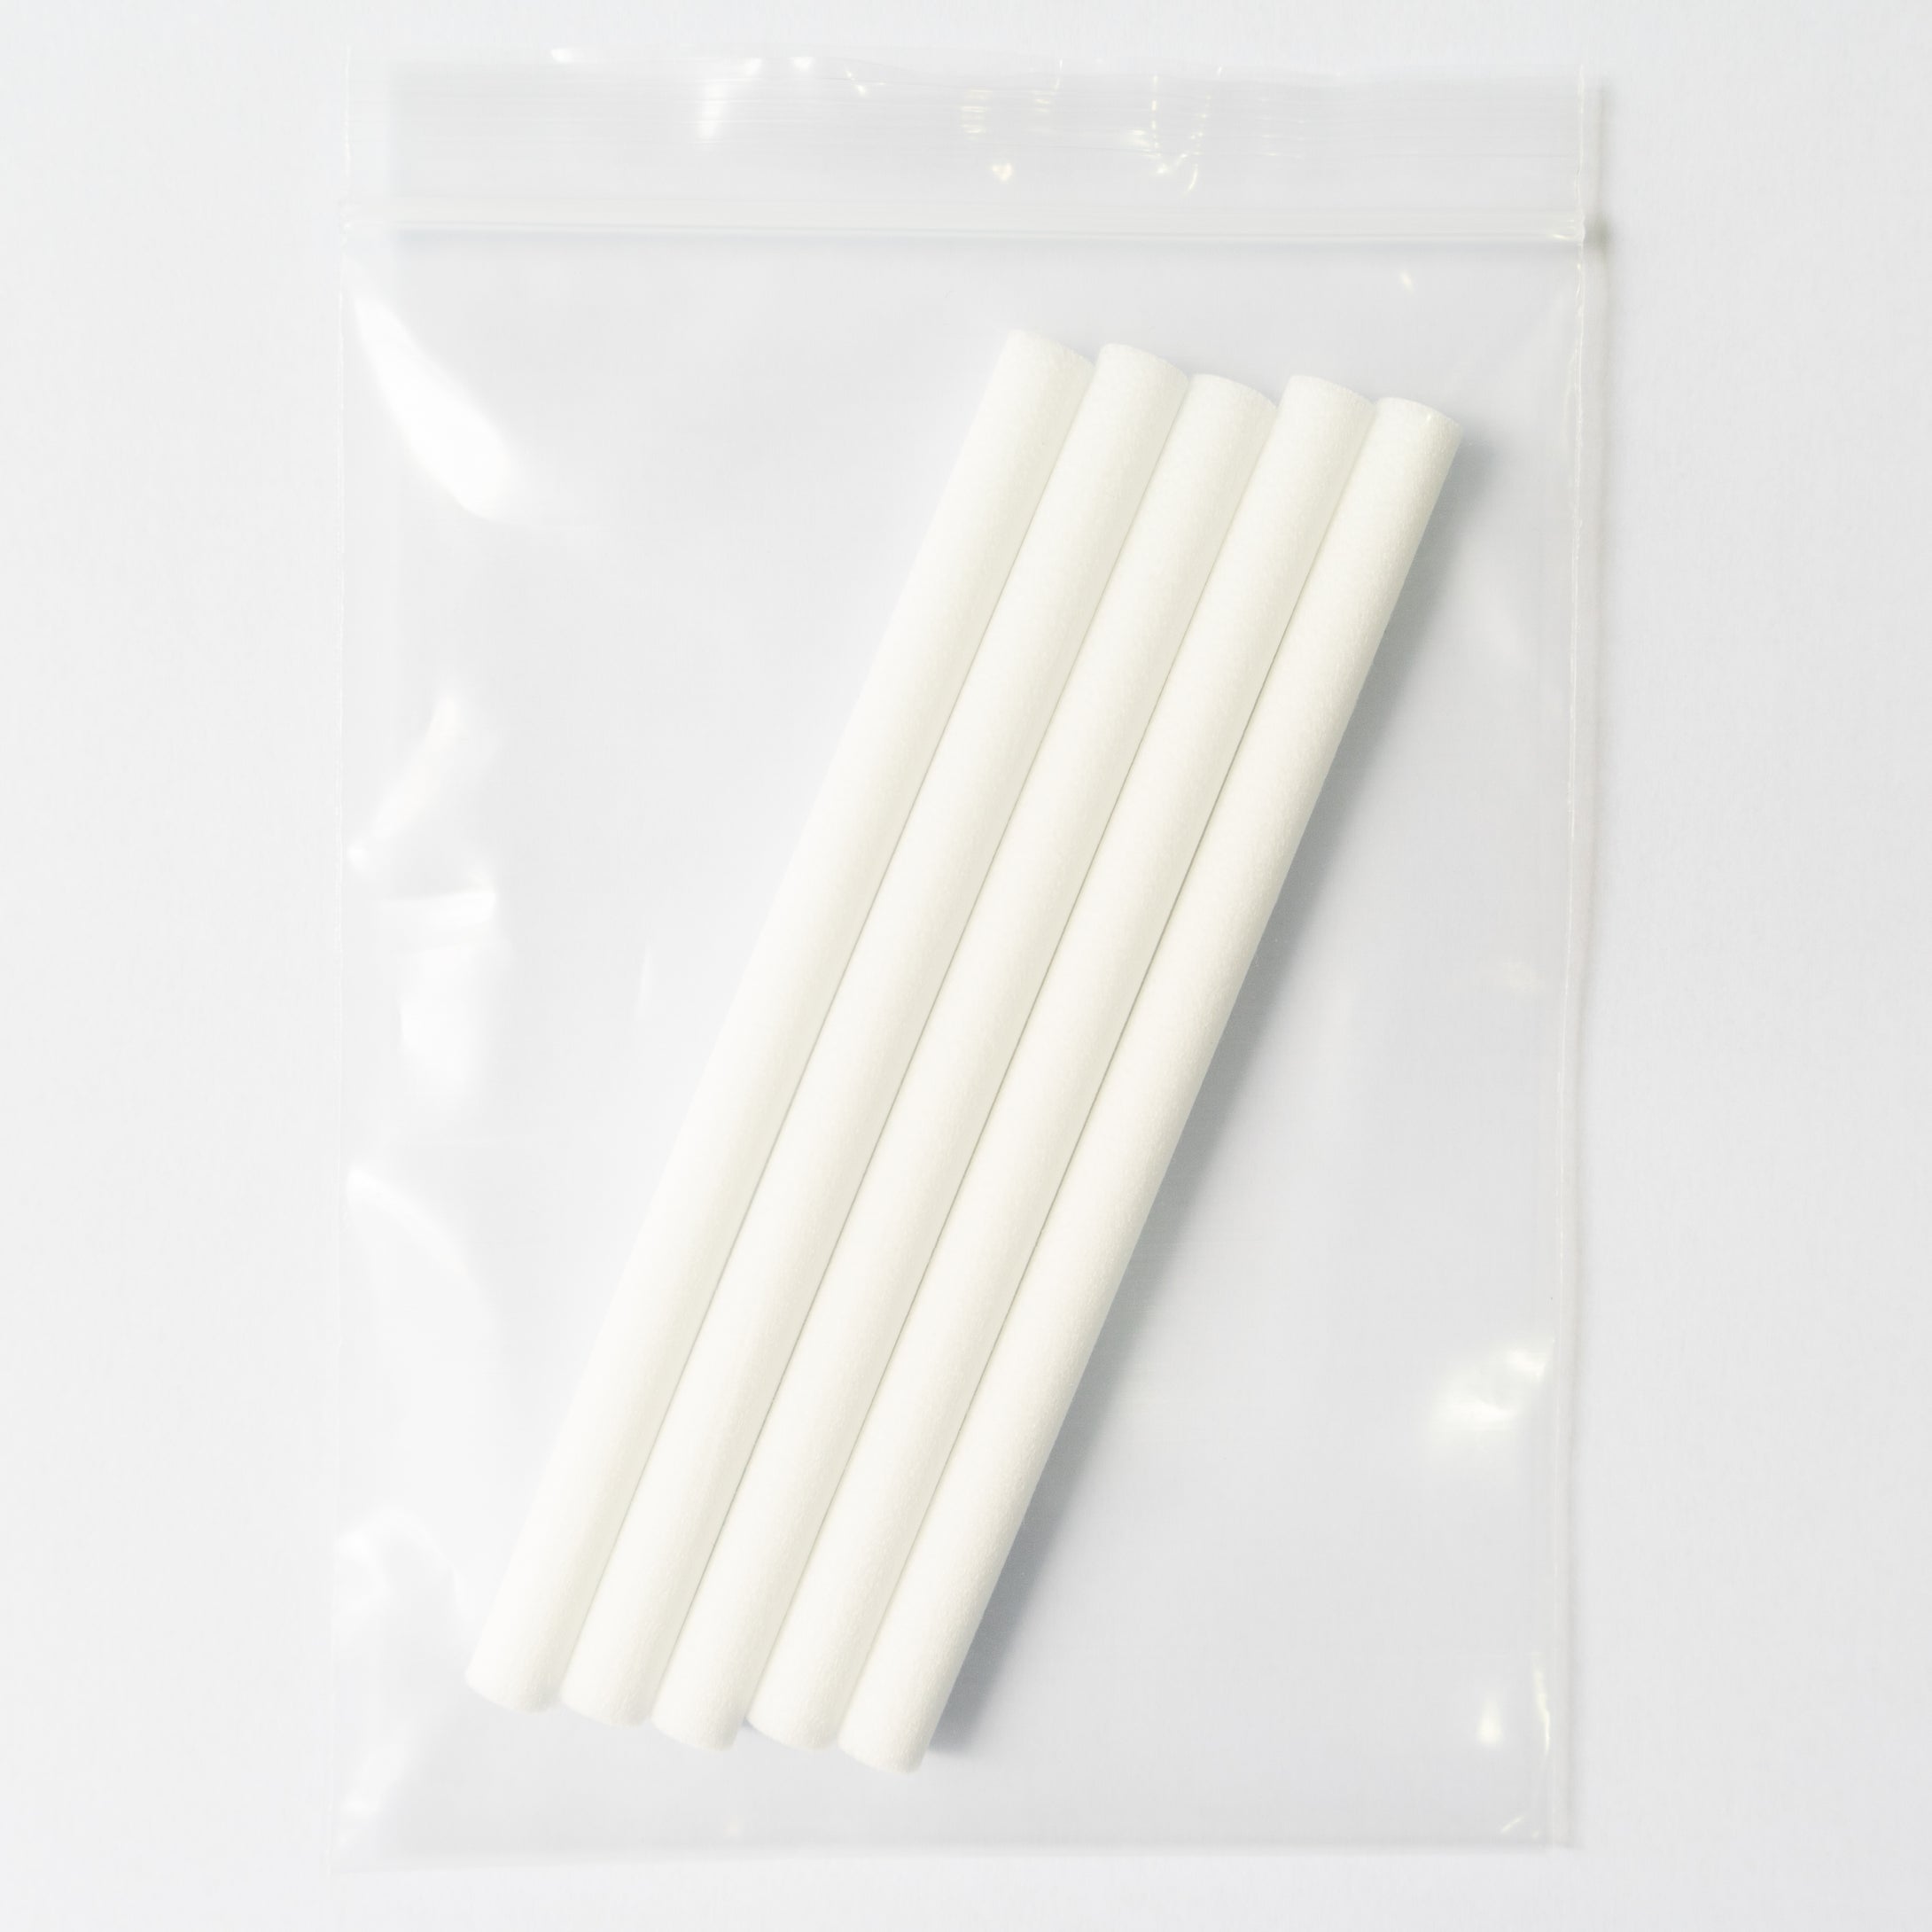 The Loel - 加濕器替換棉芯 (適用於HF-01) Humidifier Replacement Cotton Core (suitable for HF-01) (5pcs)